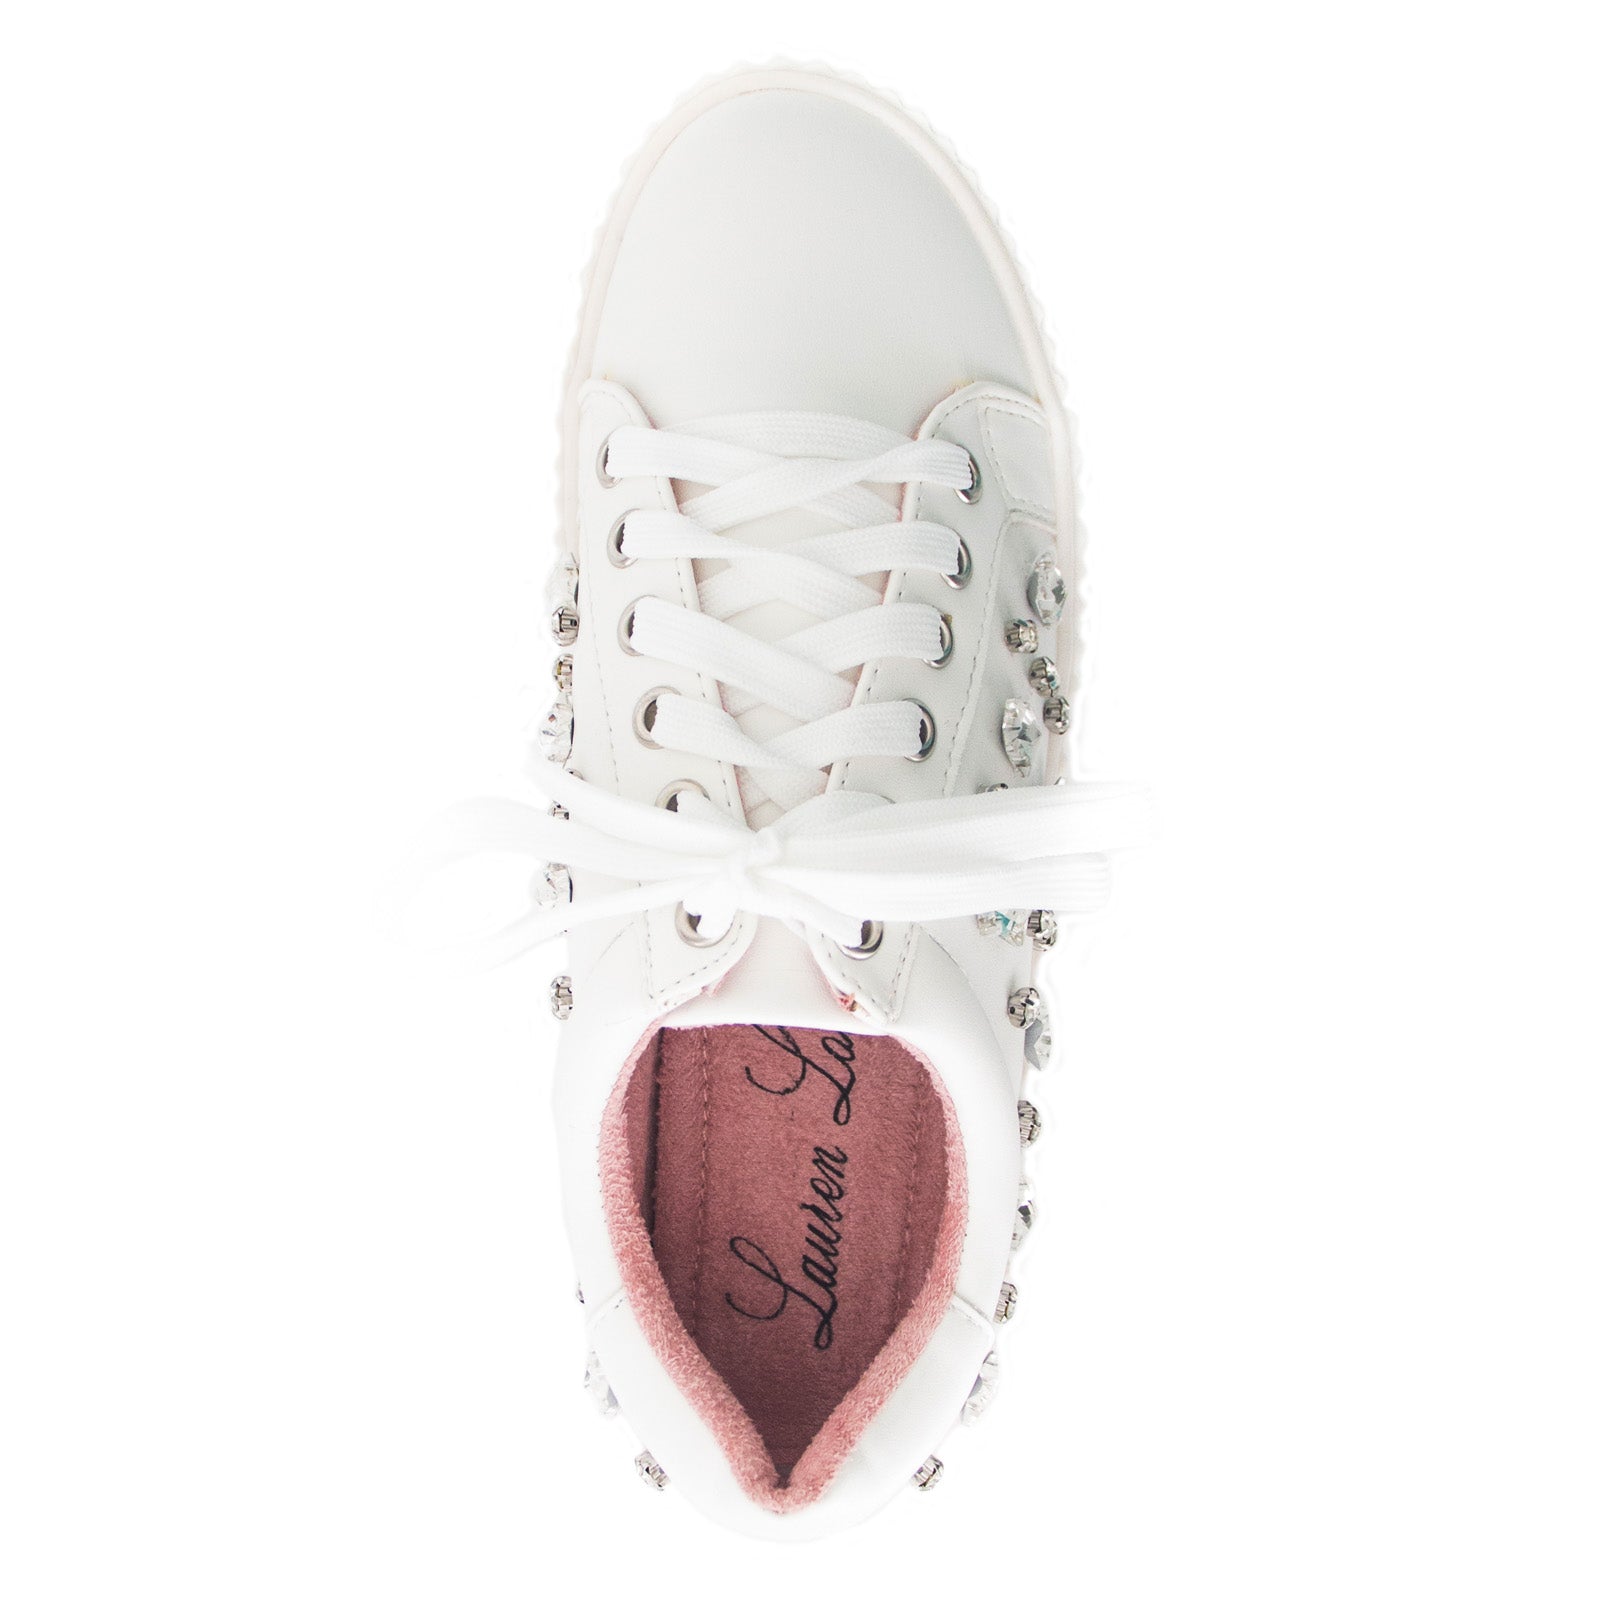 PAM TIE UP LACES PLATFORM SNEAKER WITH STONE DETAILING